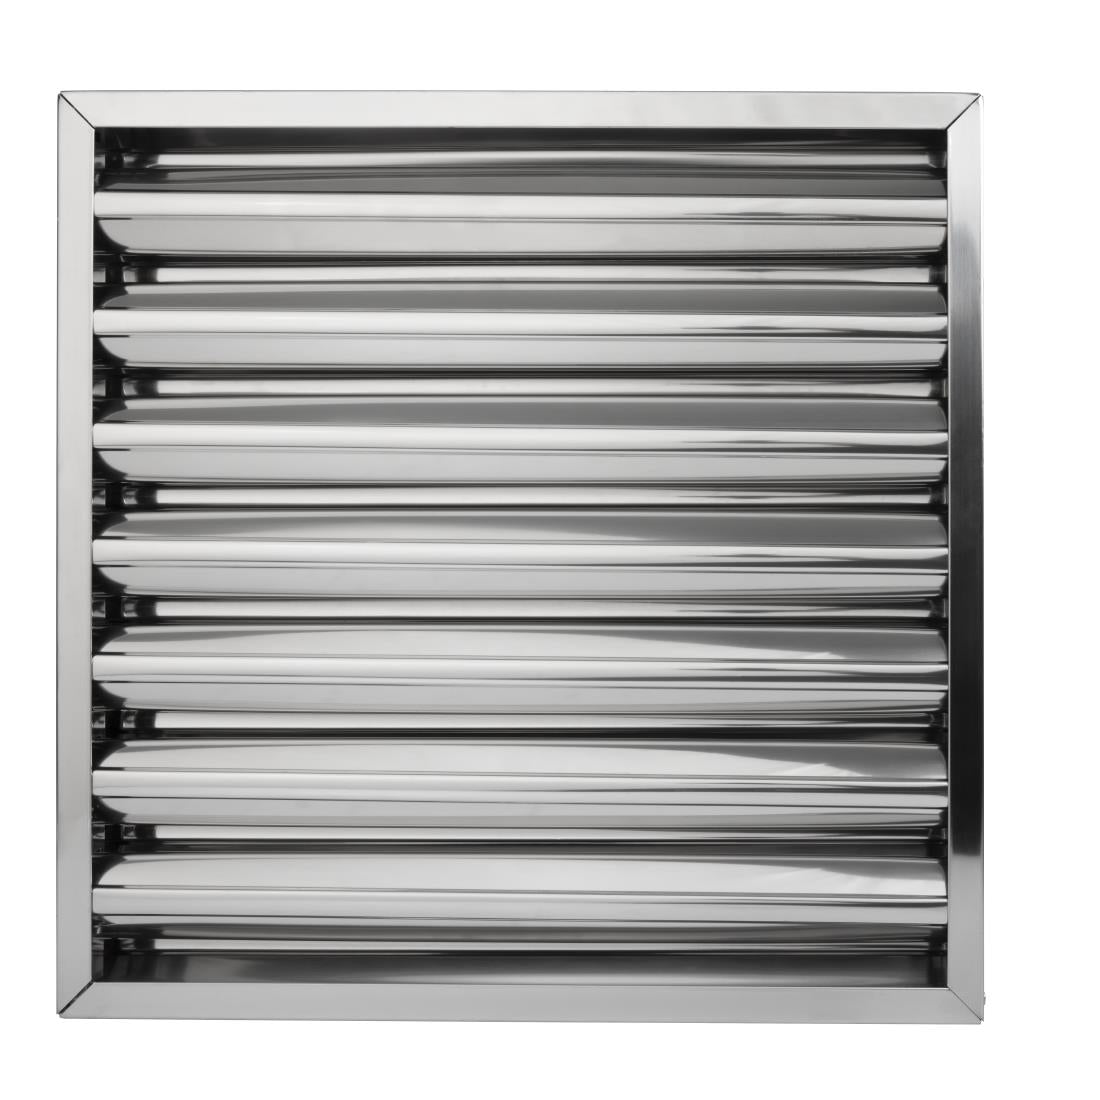 Kitchen Canopy Baffle Filter 495 x 495mm JD Catering Equipment Solutions Ltd